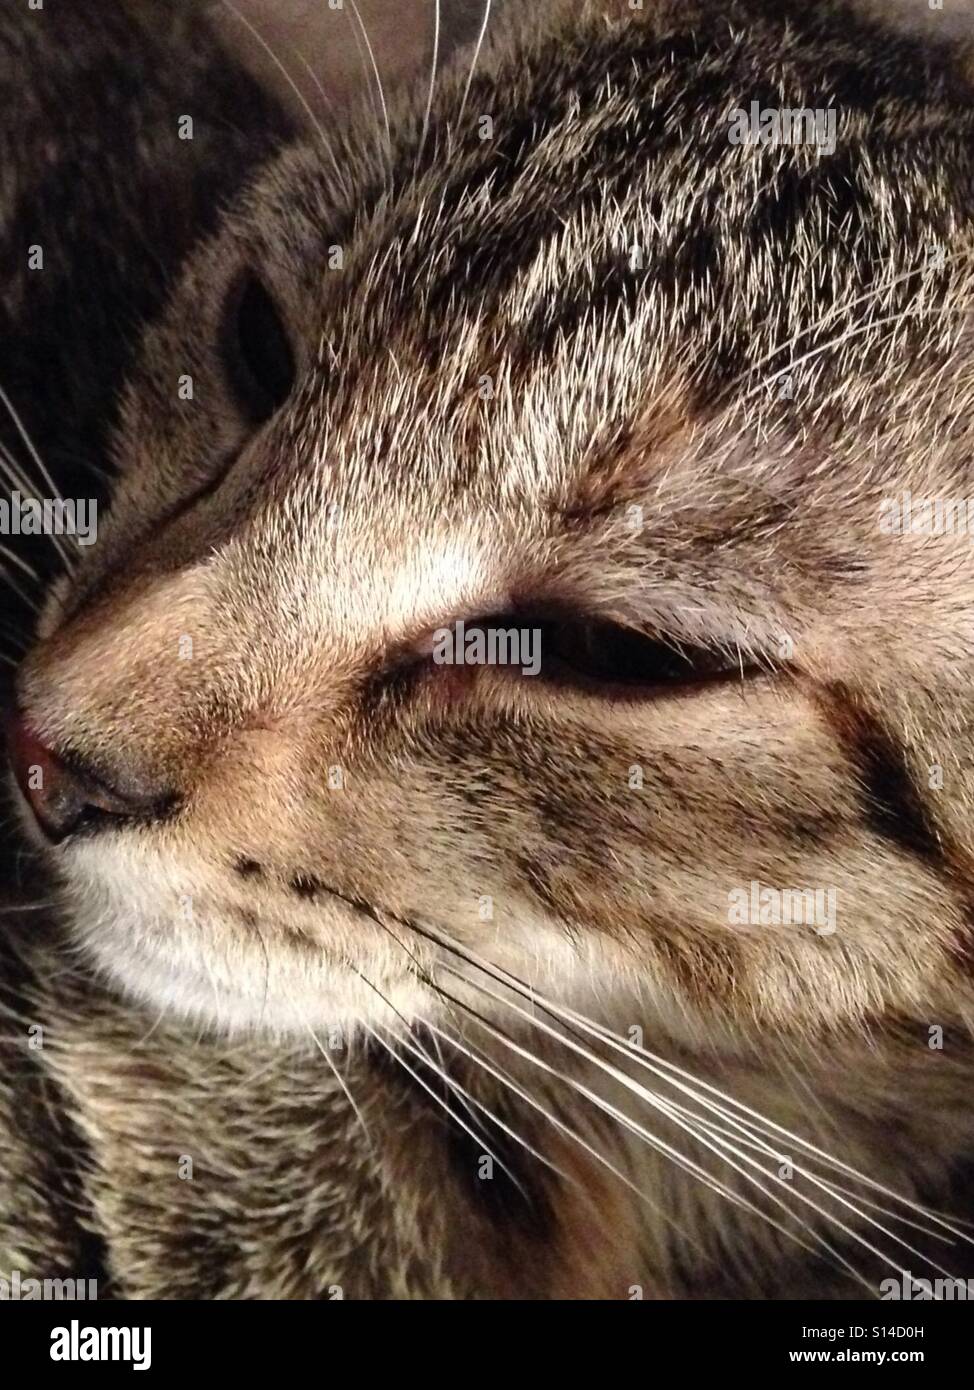 Extreme close-up portrait of tabby kitten face Banque D'Images